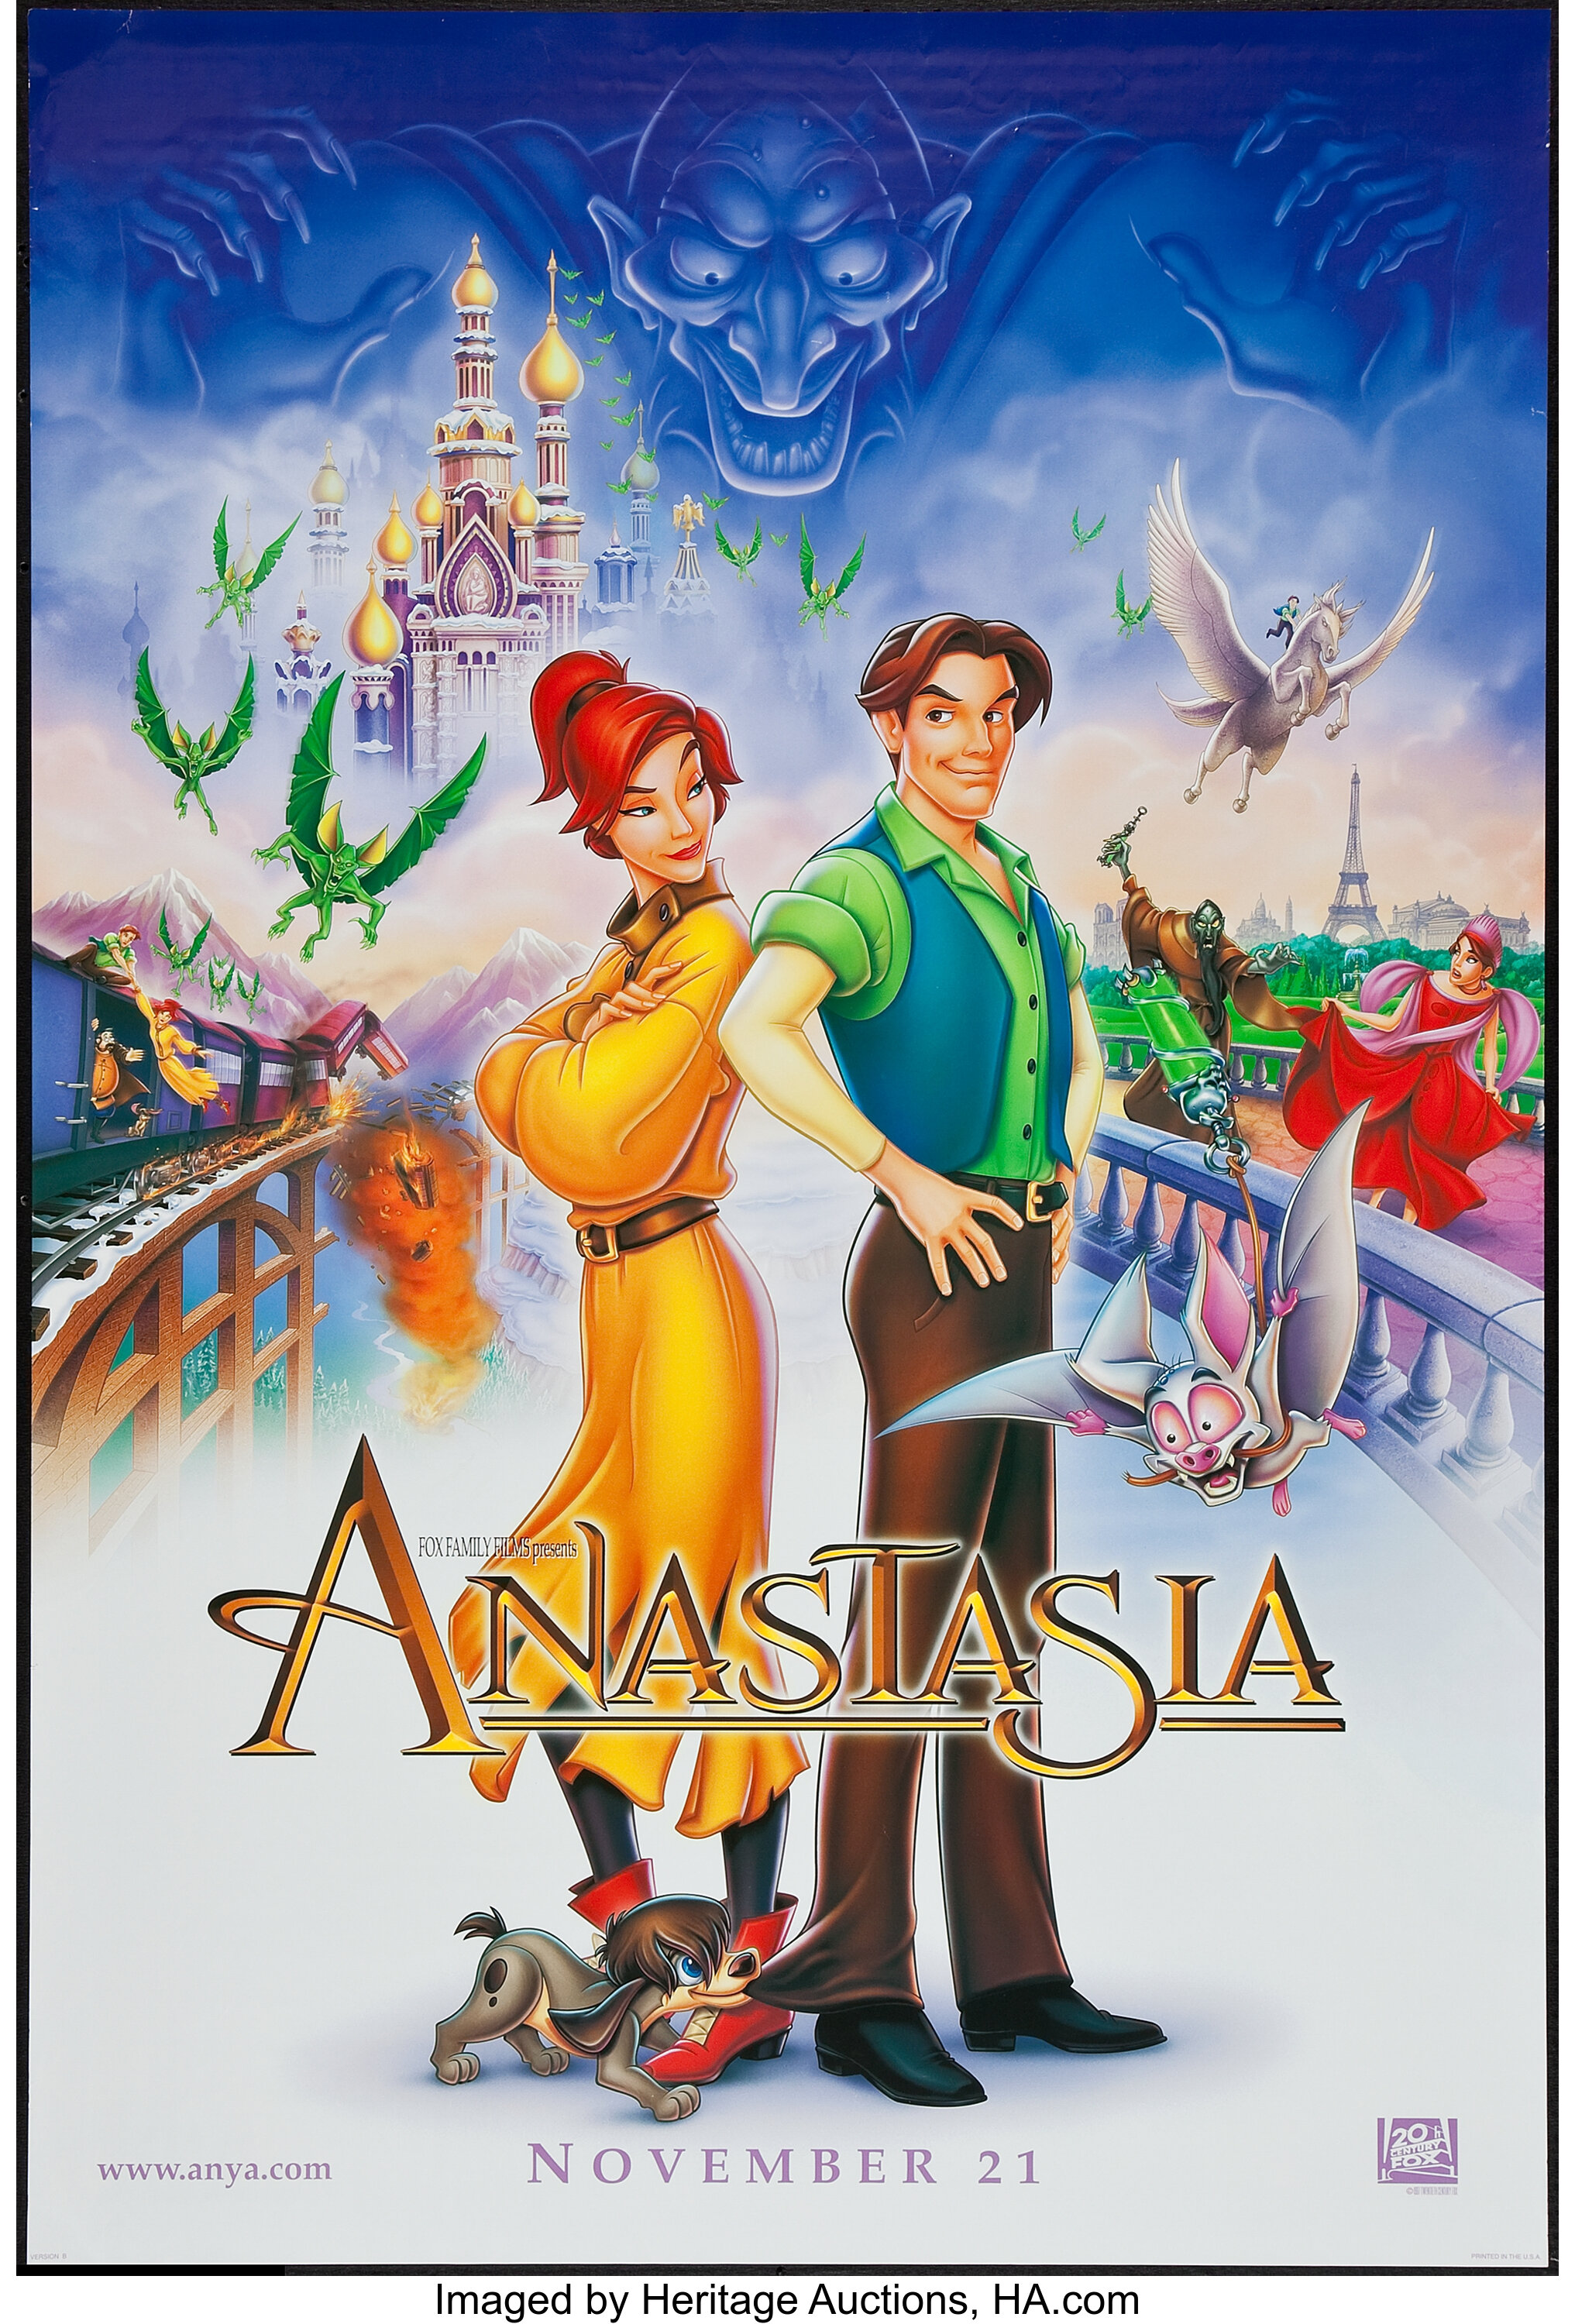 Details about   1997 ANASTASIA MOVIE PARTY INVITATIONS SEALED,fox,paper art,Come Join Our Party! 